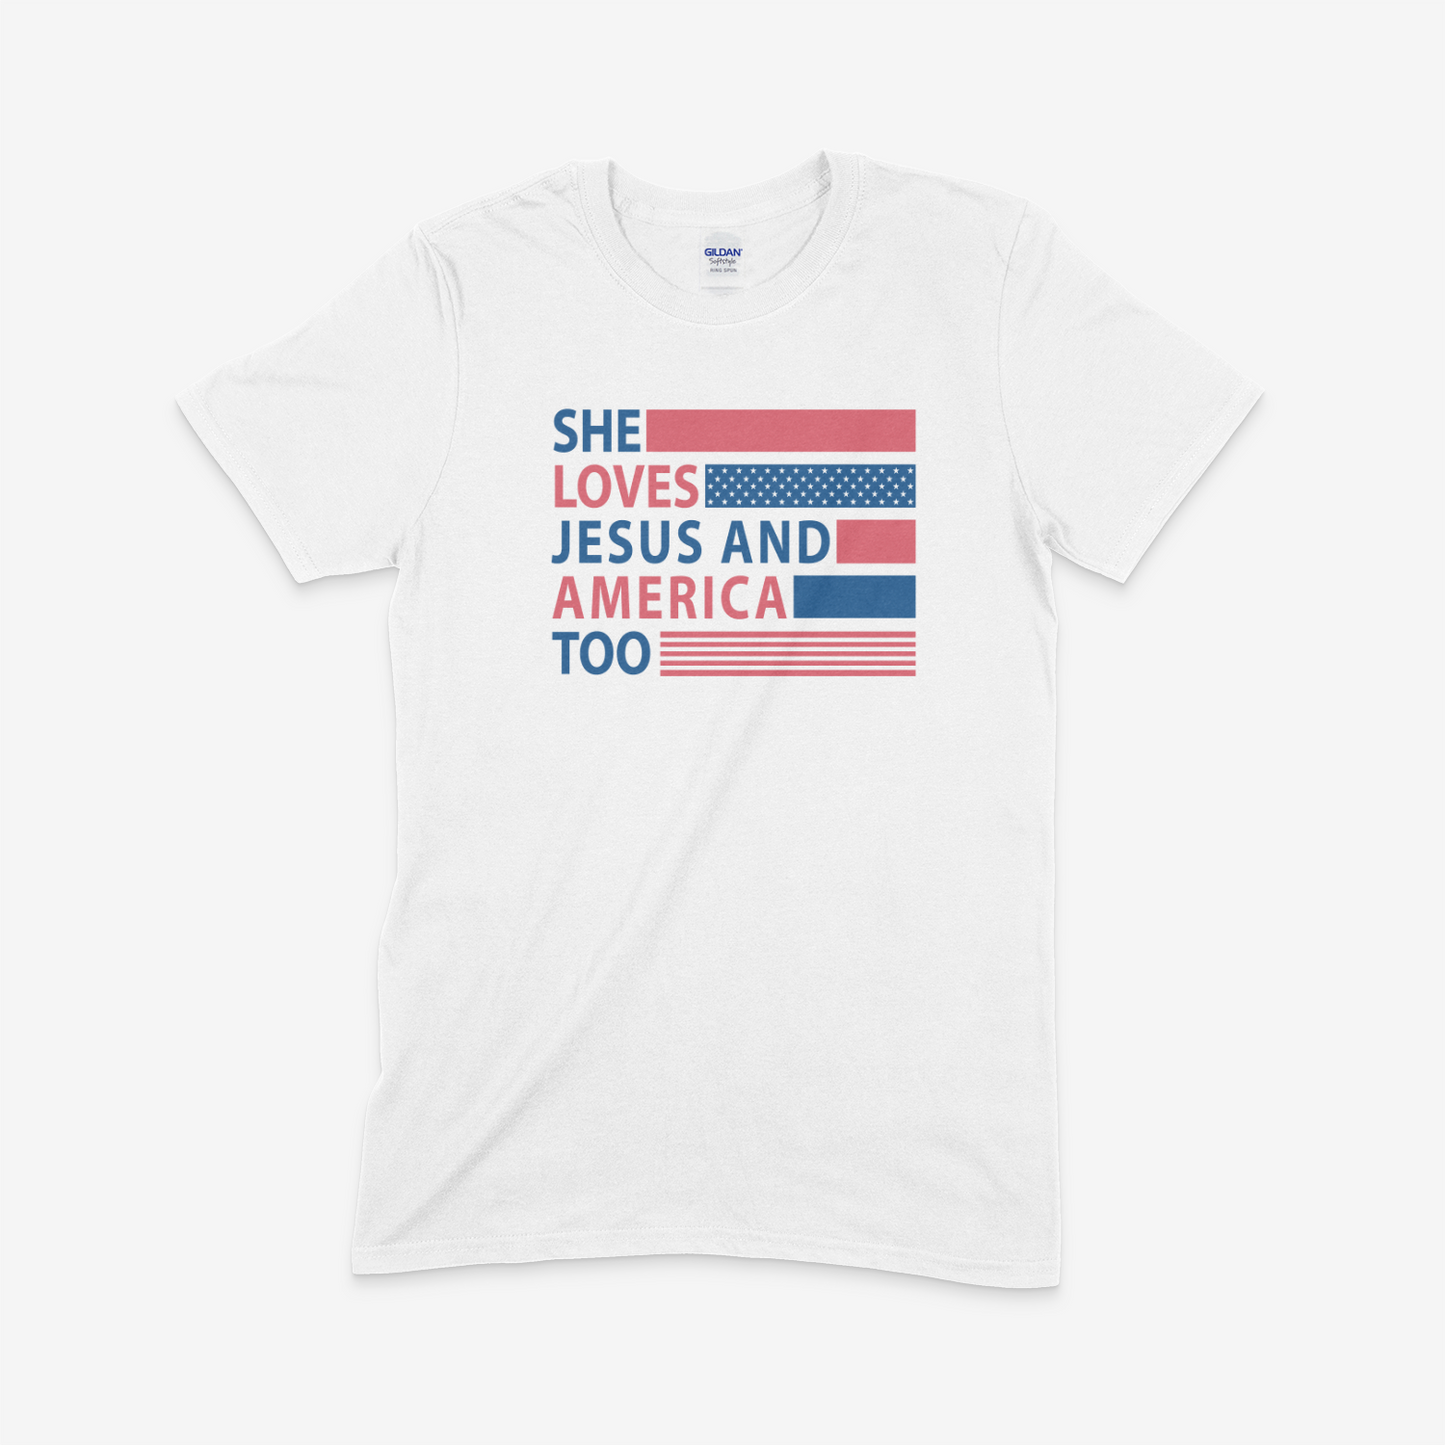 She Loves Jesus and America Too - Gildan Softstyle